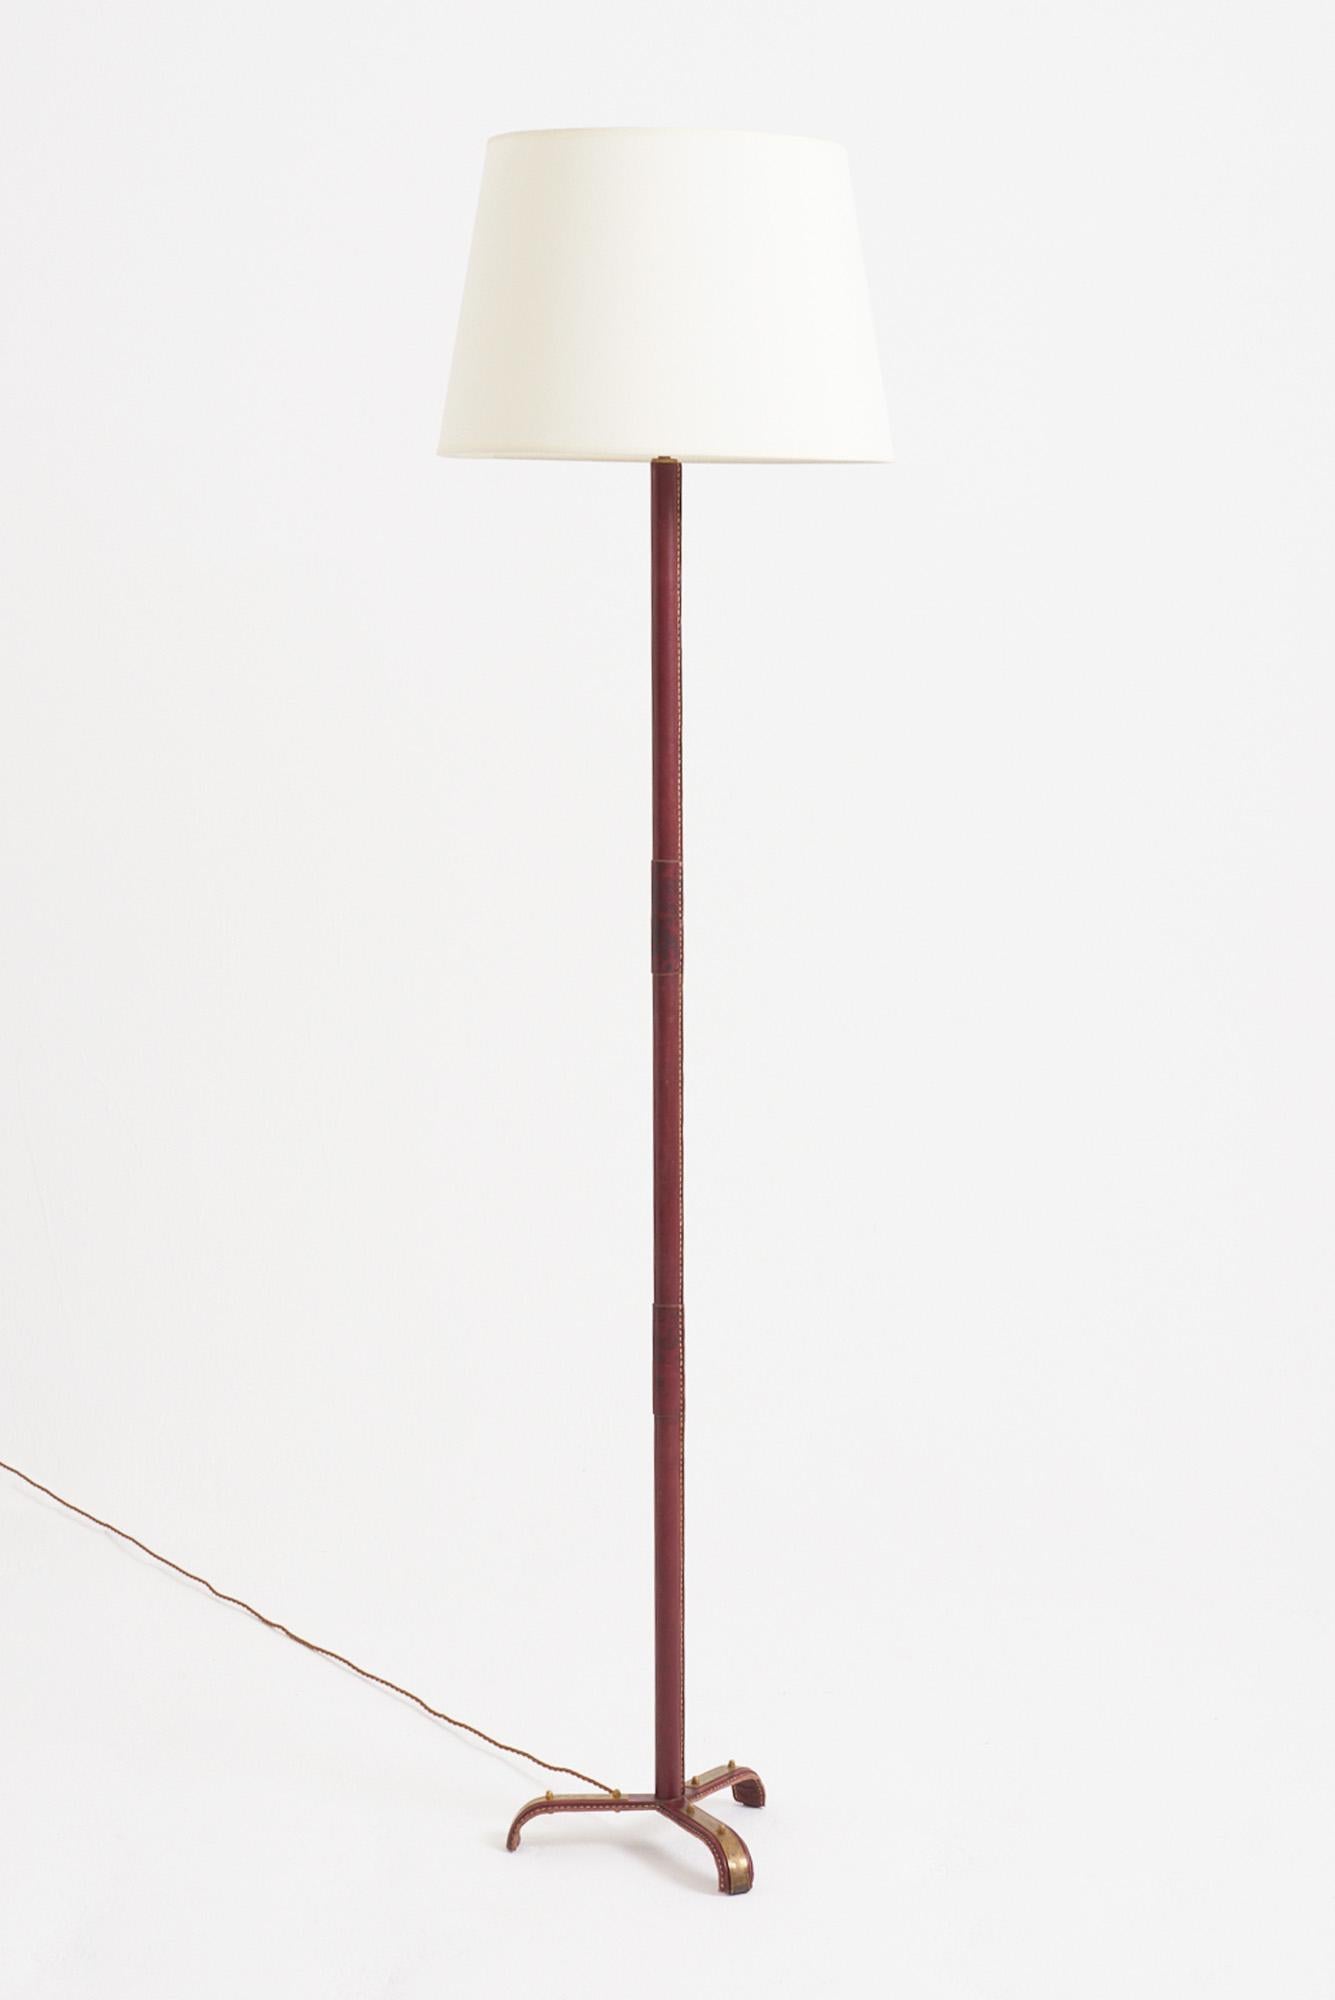 A saddle-stitched red leather floor lamp by Jacques Adnet (1900-1984)
France, mid 20th Century
With the shade: 177 cm high by 46 cm diameter 
Lamp base only: 150 cm high by 30 cm diameter (base)